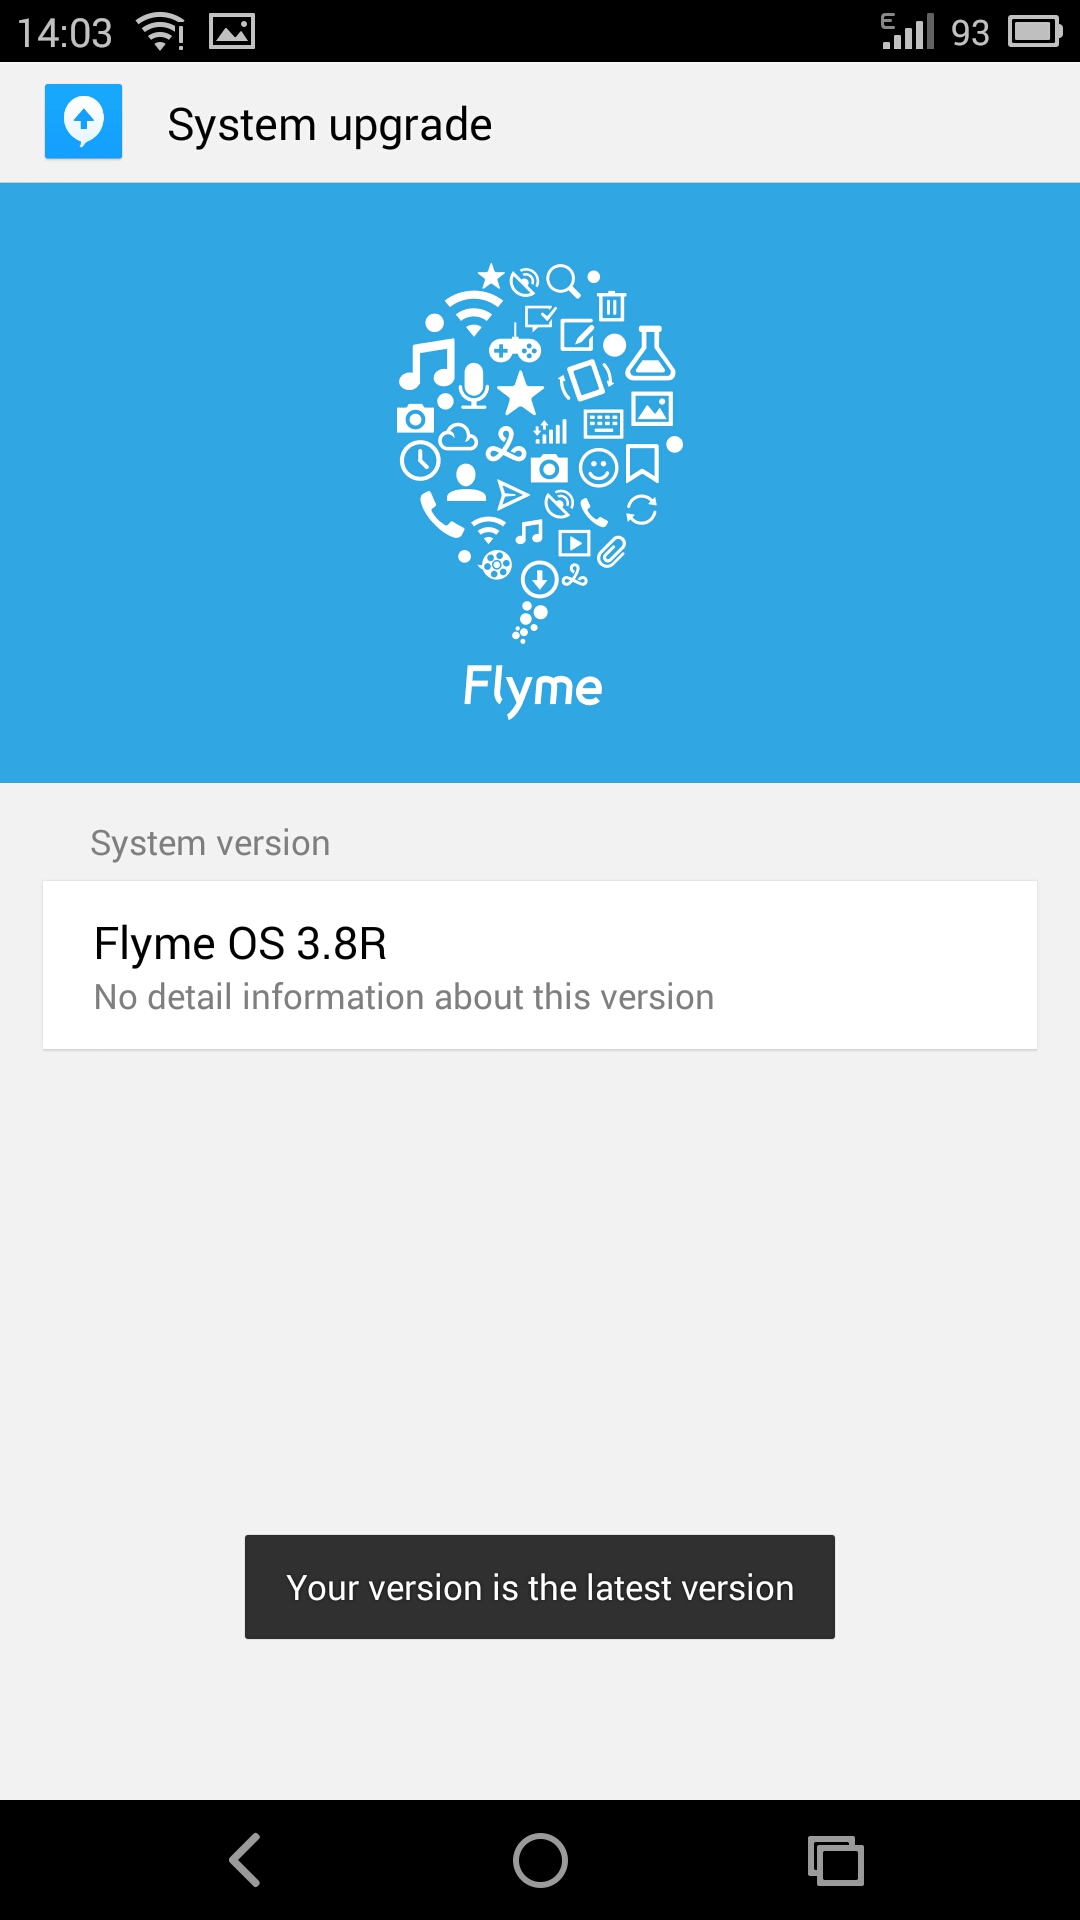 Flyme OS on Nexus 5 about